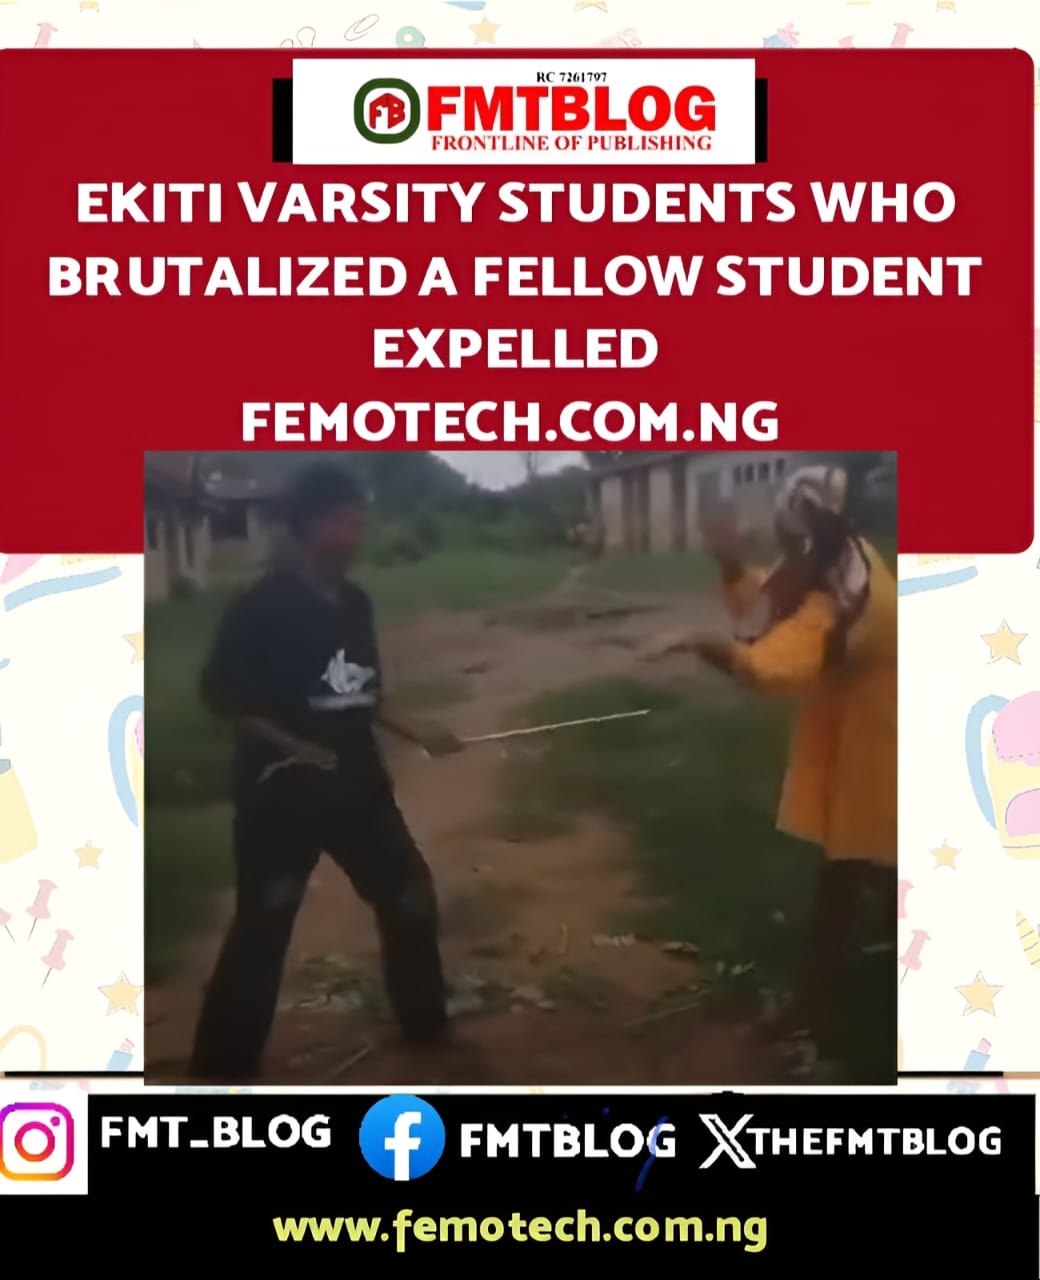 Ekiti Varsity Students Who Brutalized A Fellow Student Expelled